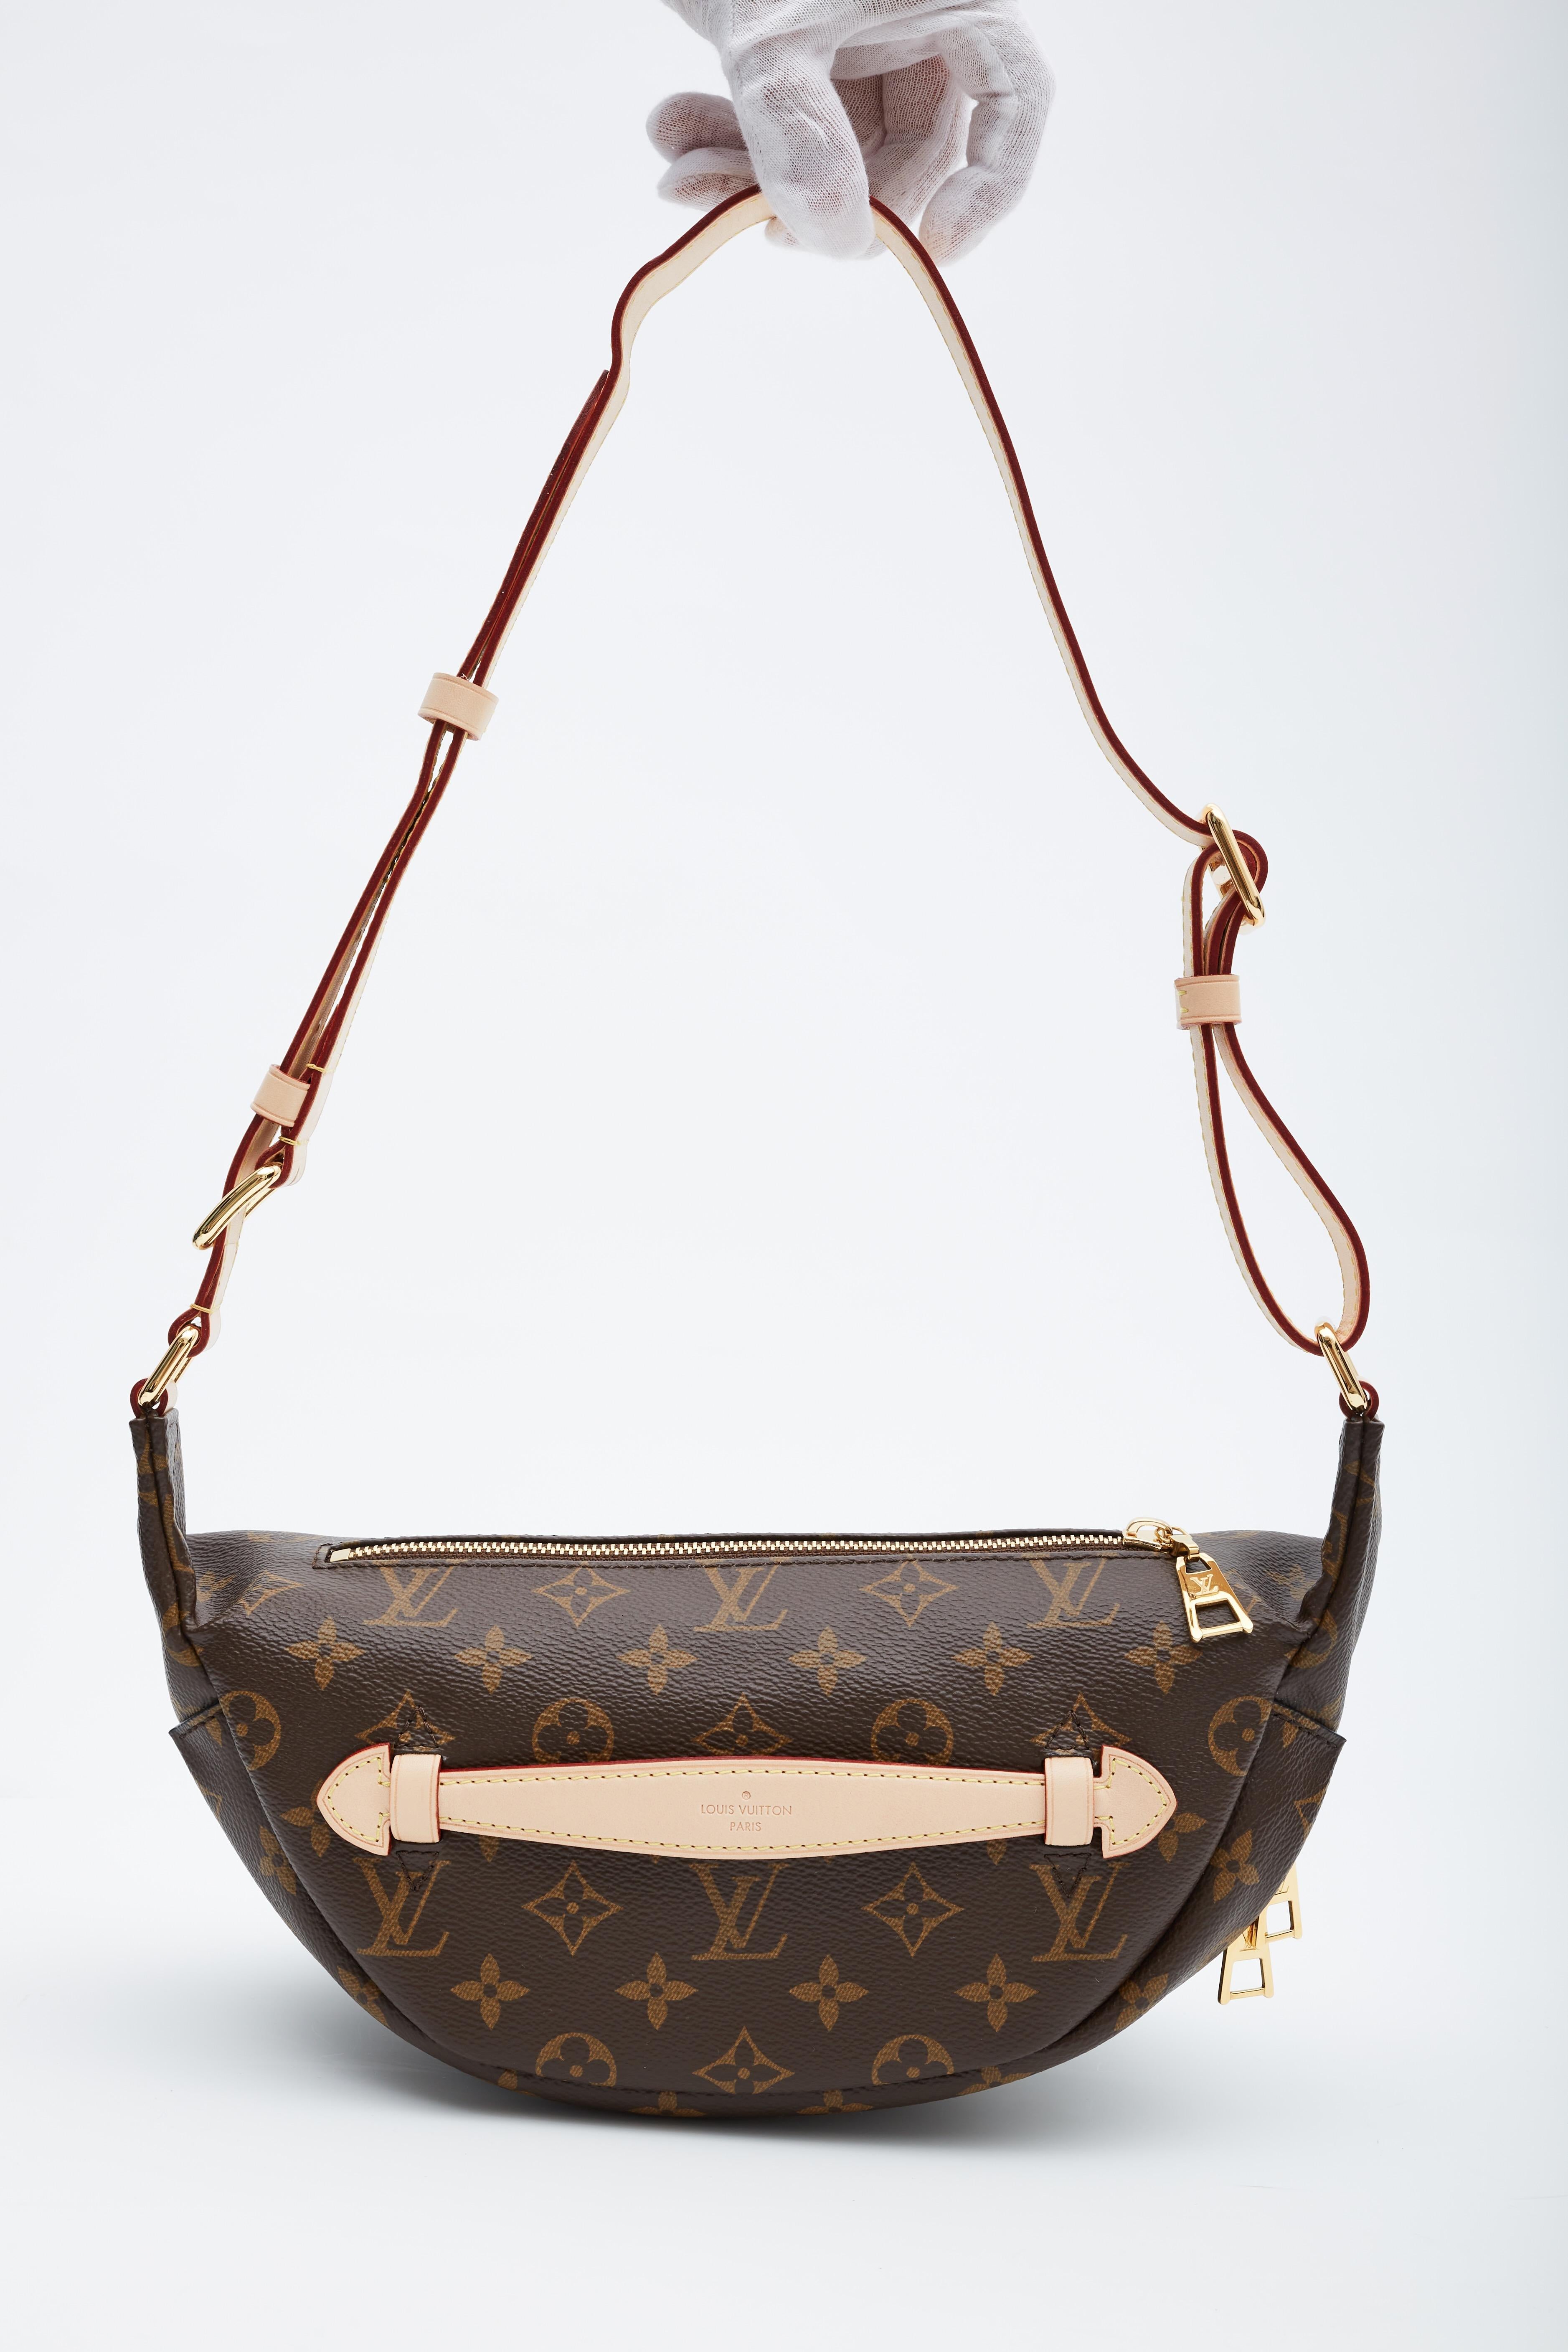 Fashioned in classic Monogram canvas and signed with a “Louis Vuitton Paris” leather patch, this uber-functional Bumbag transforms sportwear into the very definition of casual chic. Wear it as a belt bag, cross-body or over the shoulder for a